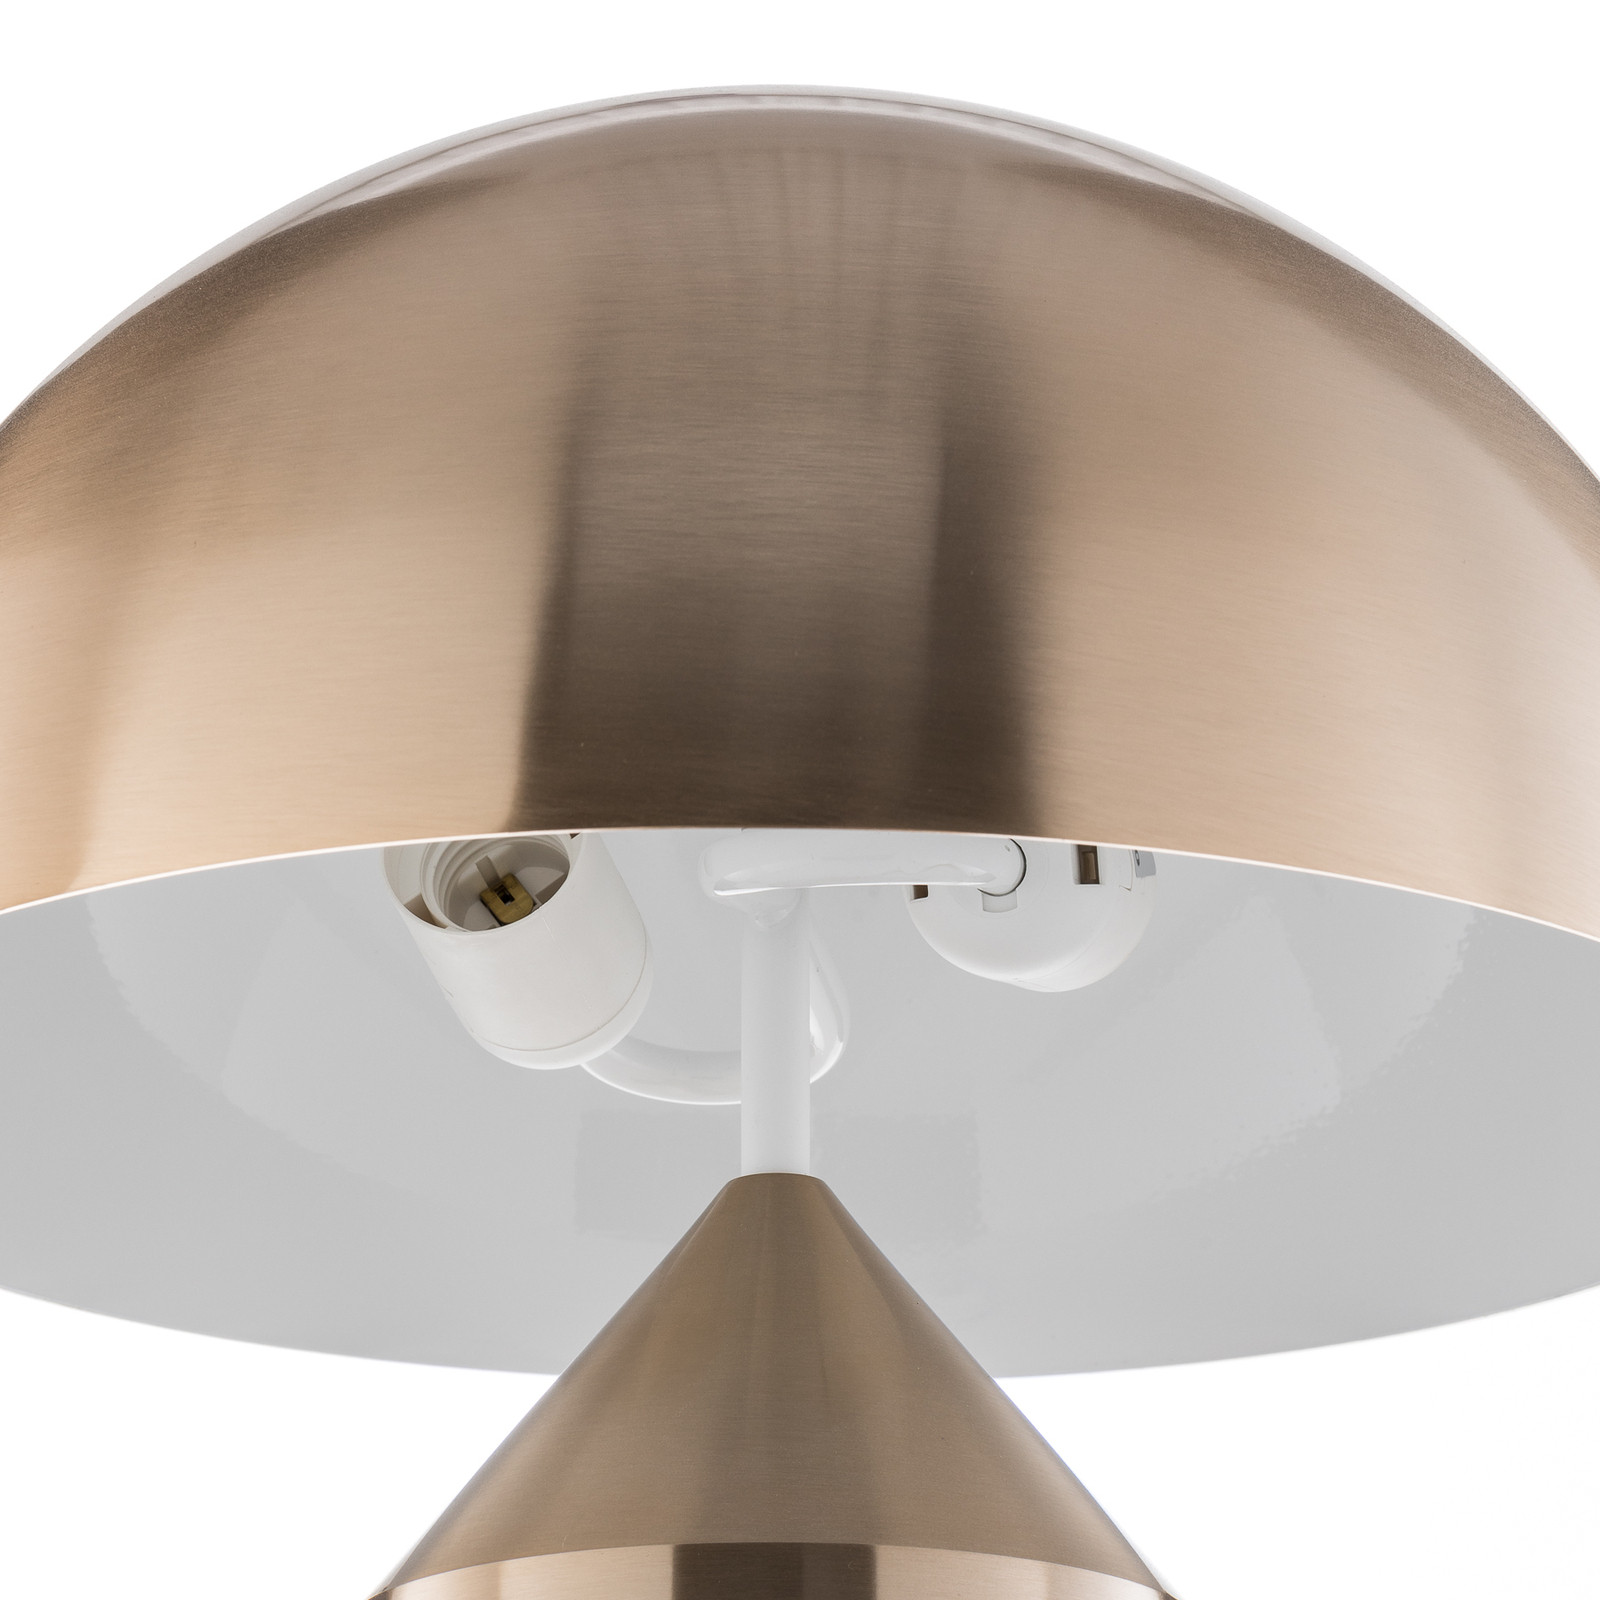 Oluce Atollo table lamp, dimmable, Ø38cm, gold